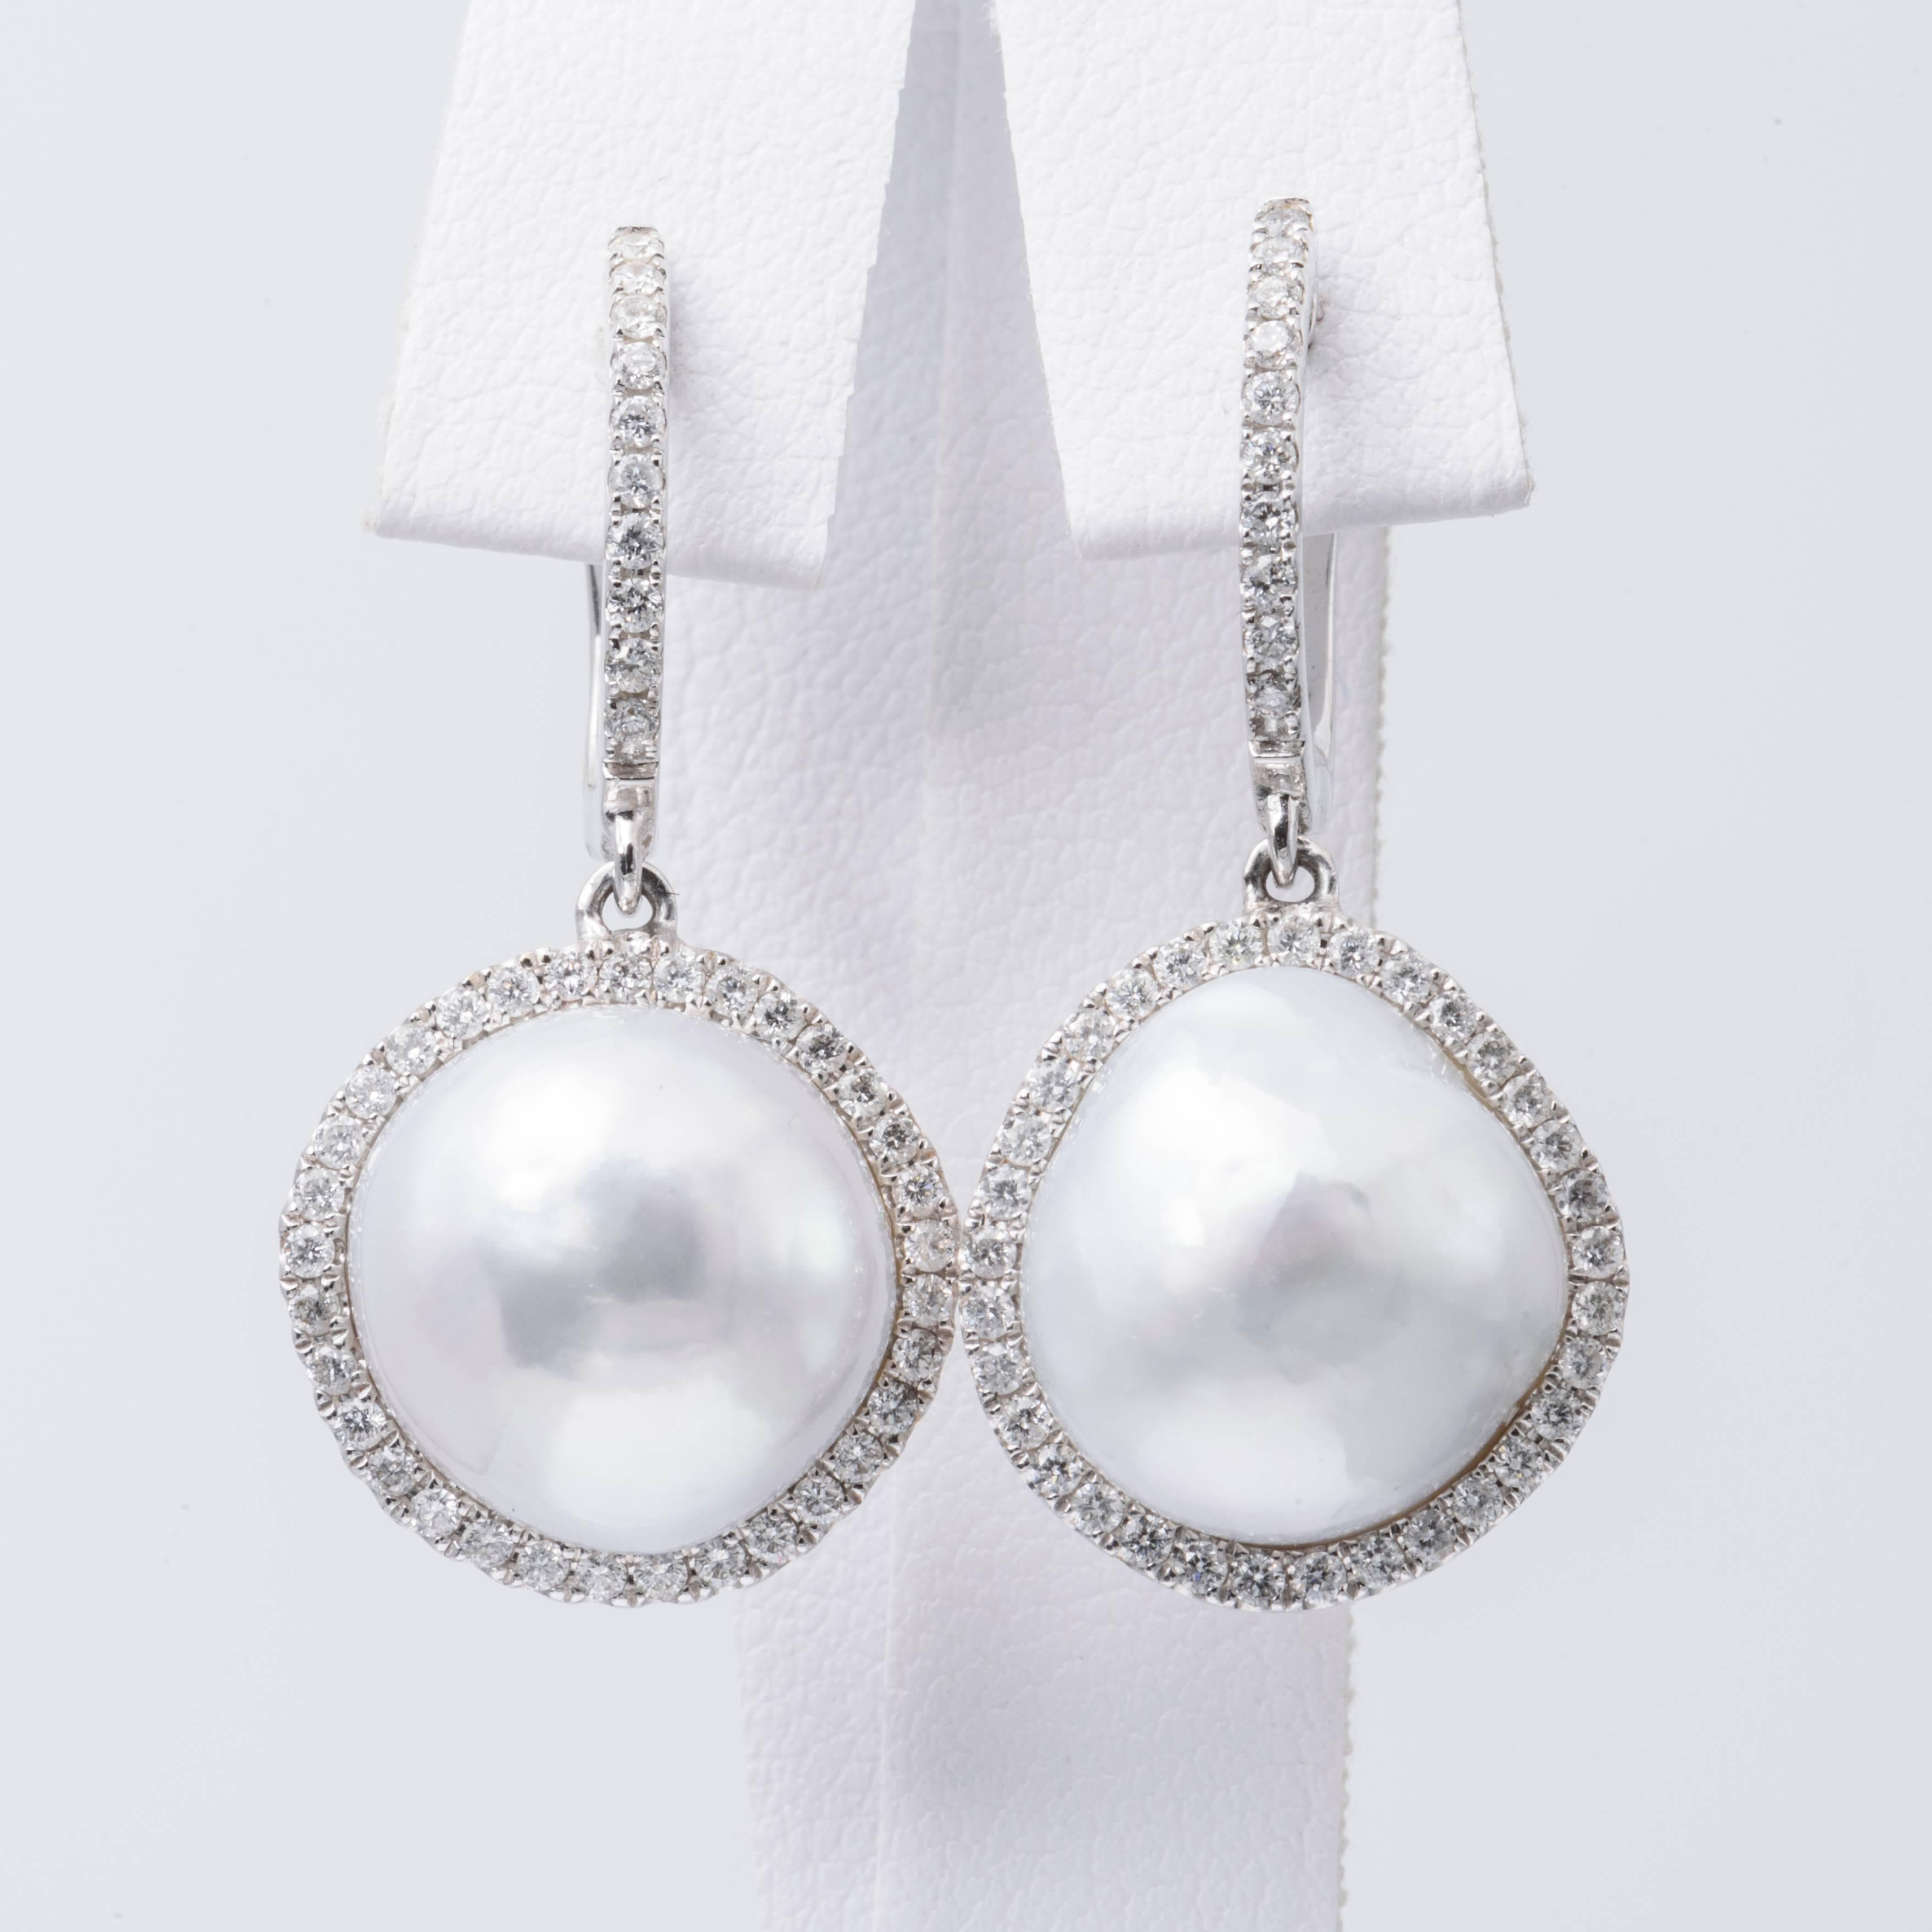 18K White gold South Sea baroque pearl earrings measuring 12-13 mm flanked with round brilliants weighing 0.64 carats. Pearls are white with Silver overtone

Matching Necklace is available. 